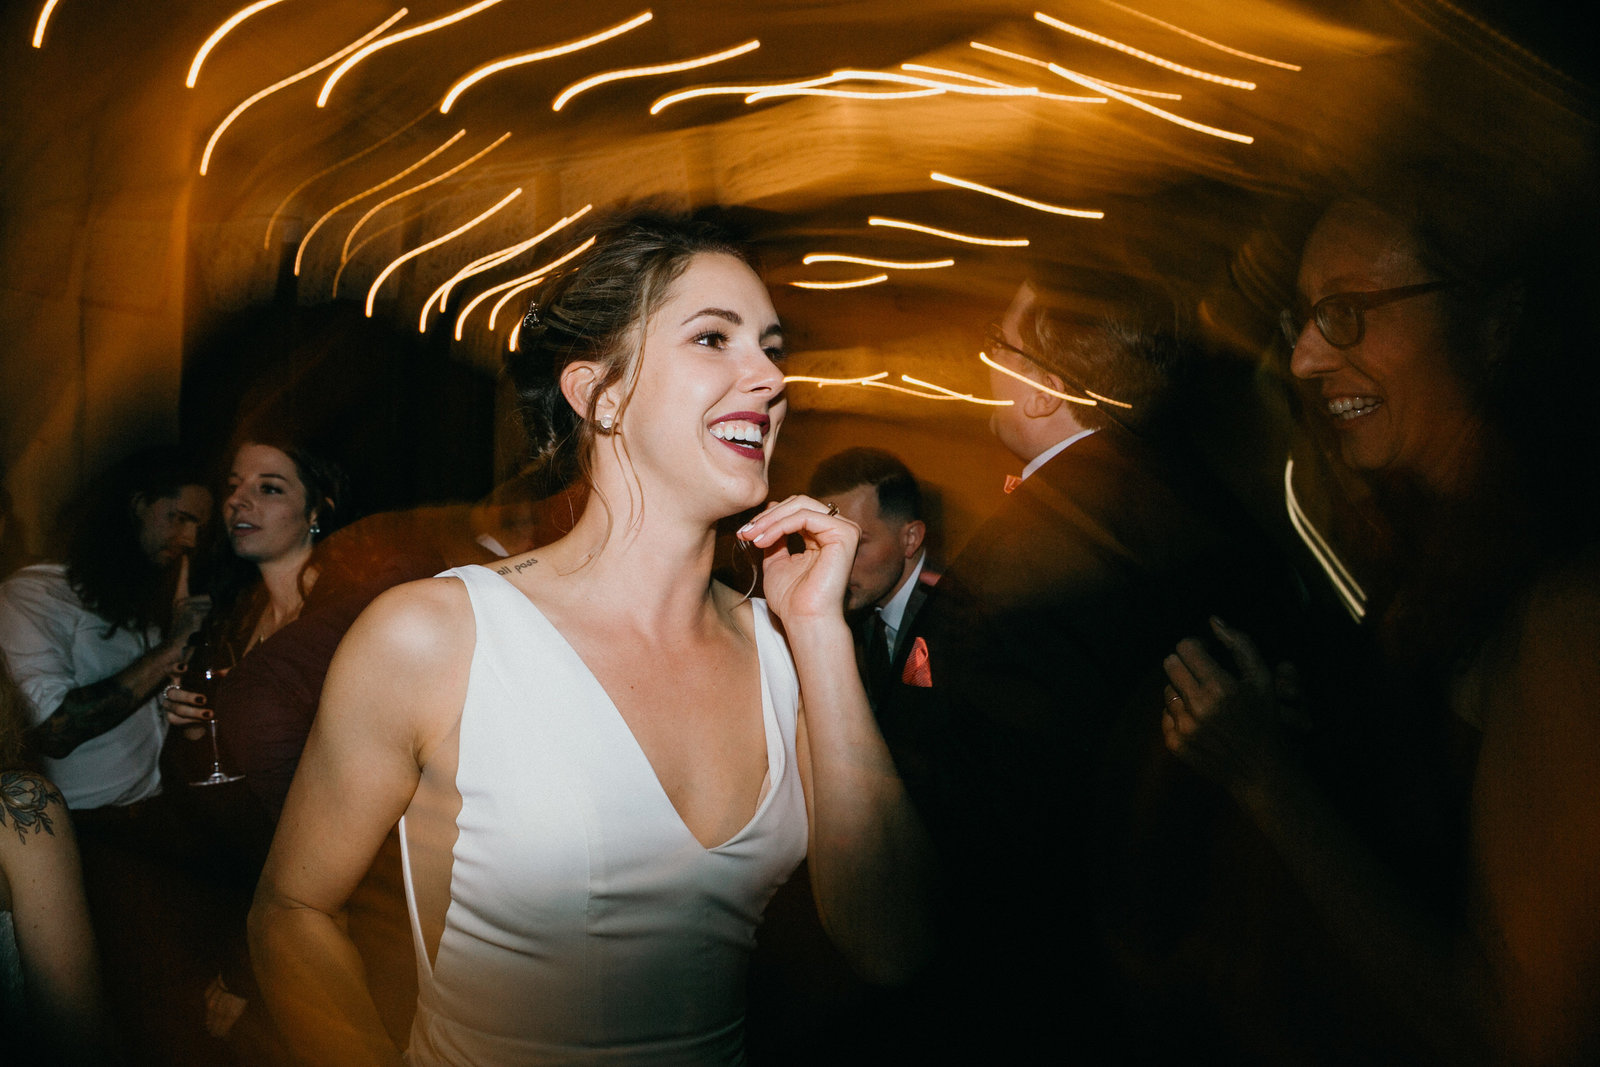 Artistic shot of the bride on the dance floor at his unconventional wedding venue.